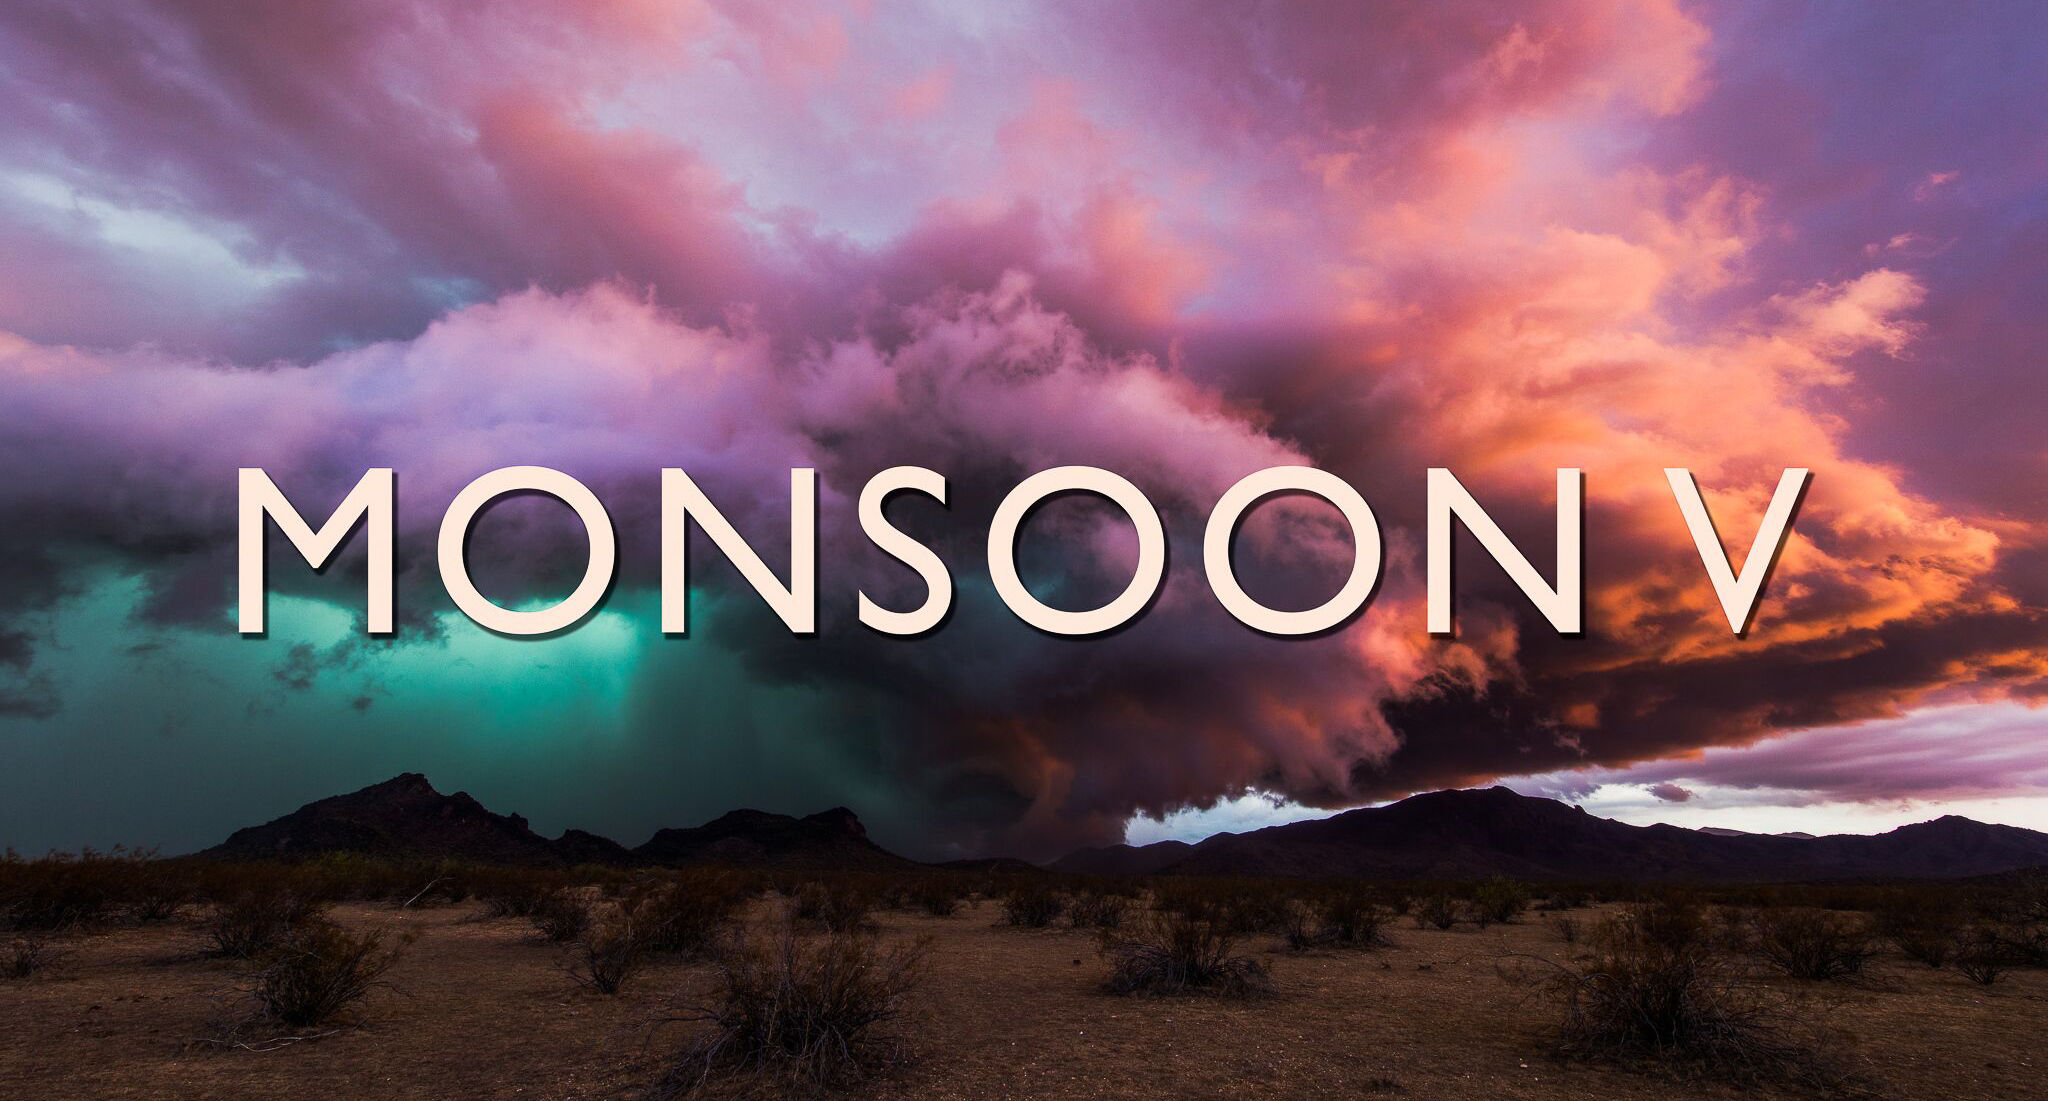 Monsoon V, a time-lapse video of epic storms in Arizona. Credit: Mike Olbinski